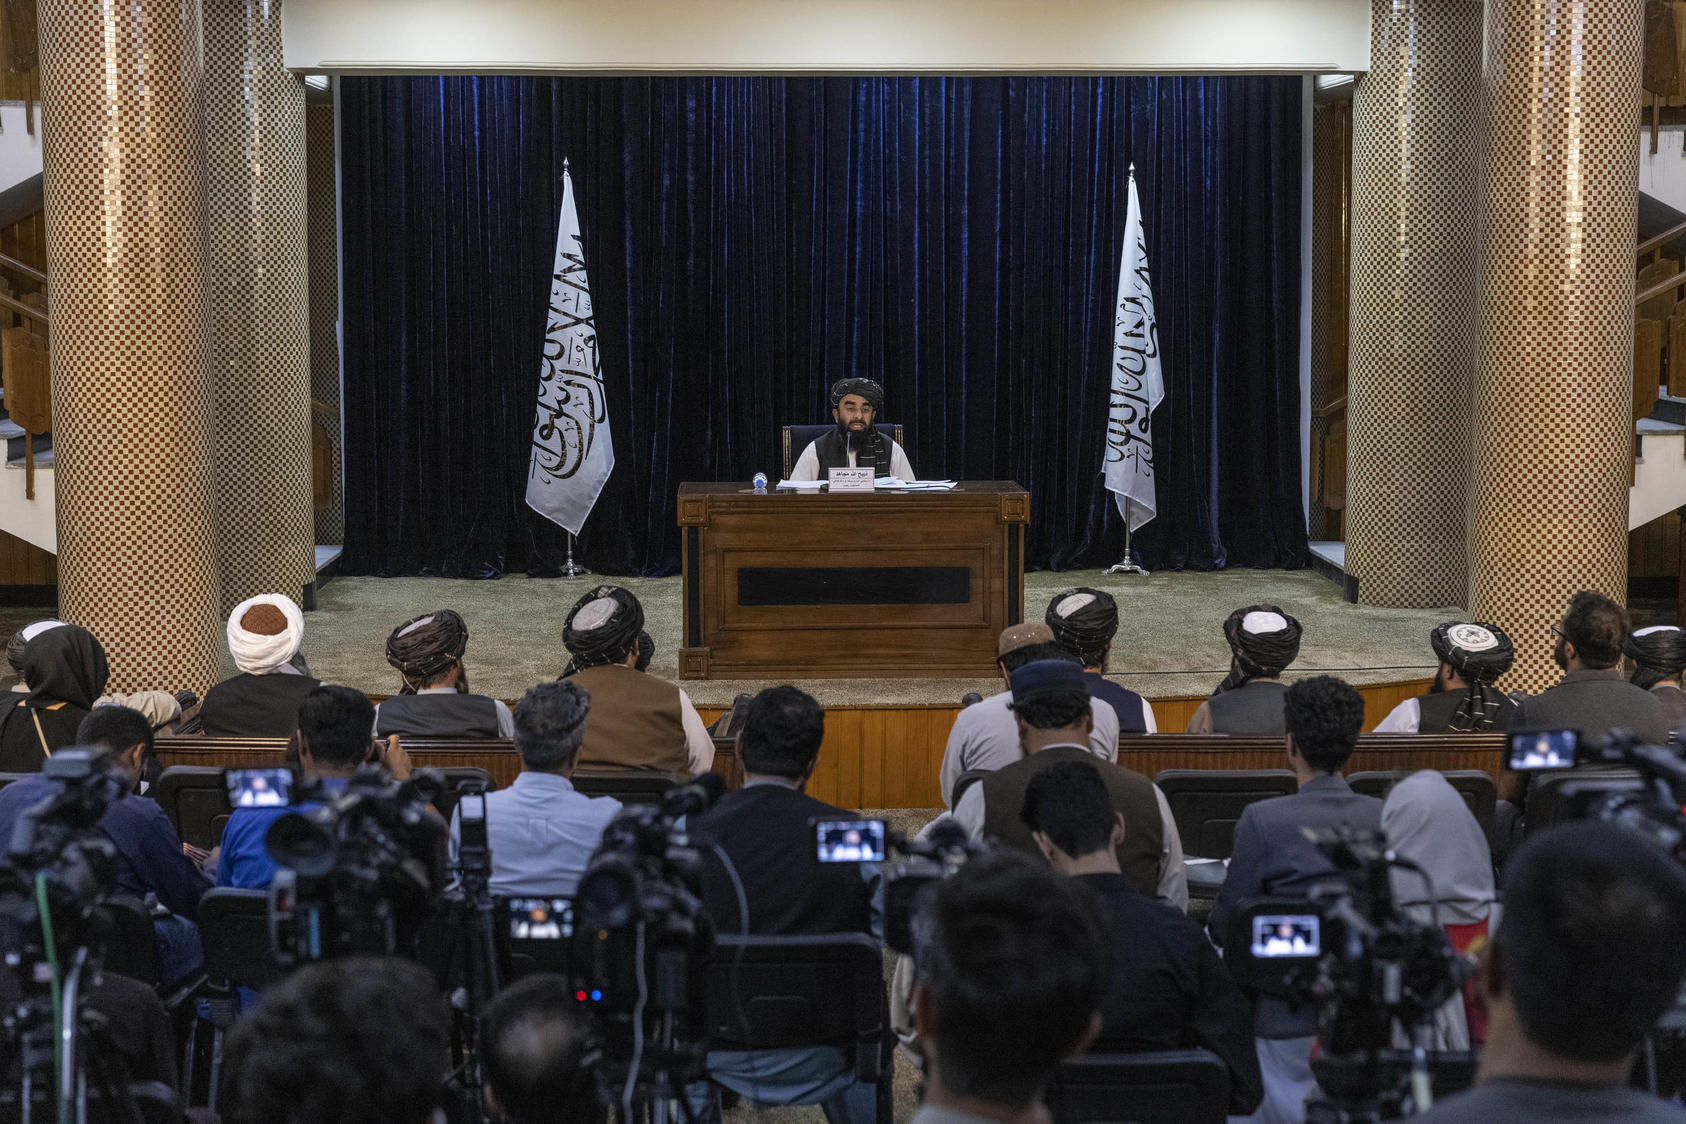 Taliban spokesperson Zabih Ullah Mujahid discusses Afghanistan’s new government in Kabul on September 7, 2021. (Victor J. Blue/New York Times)